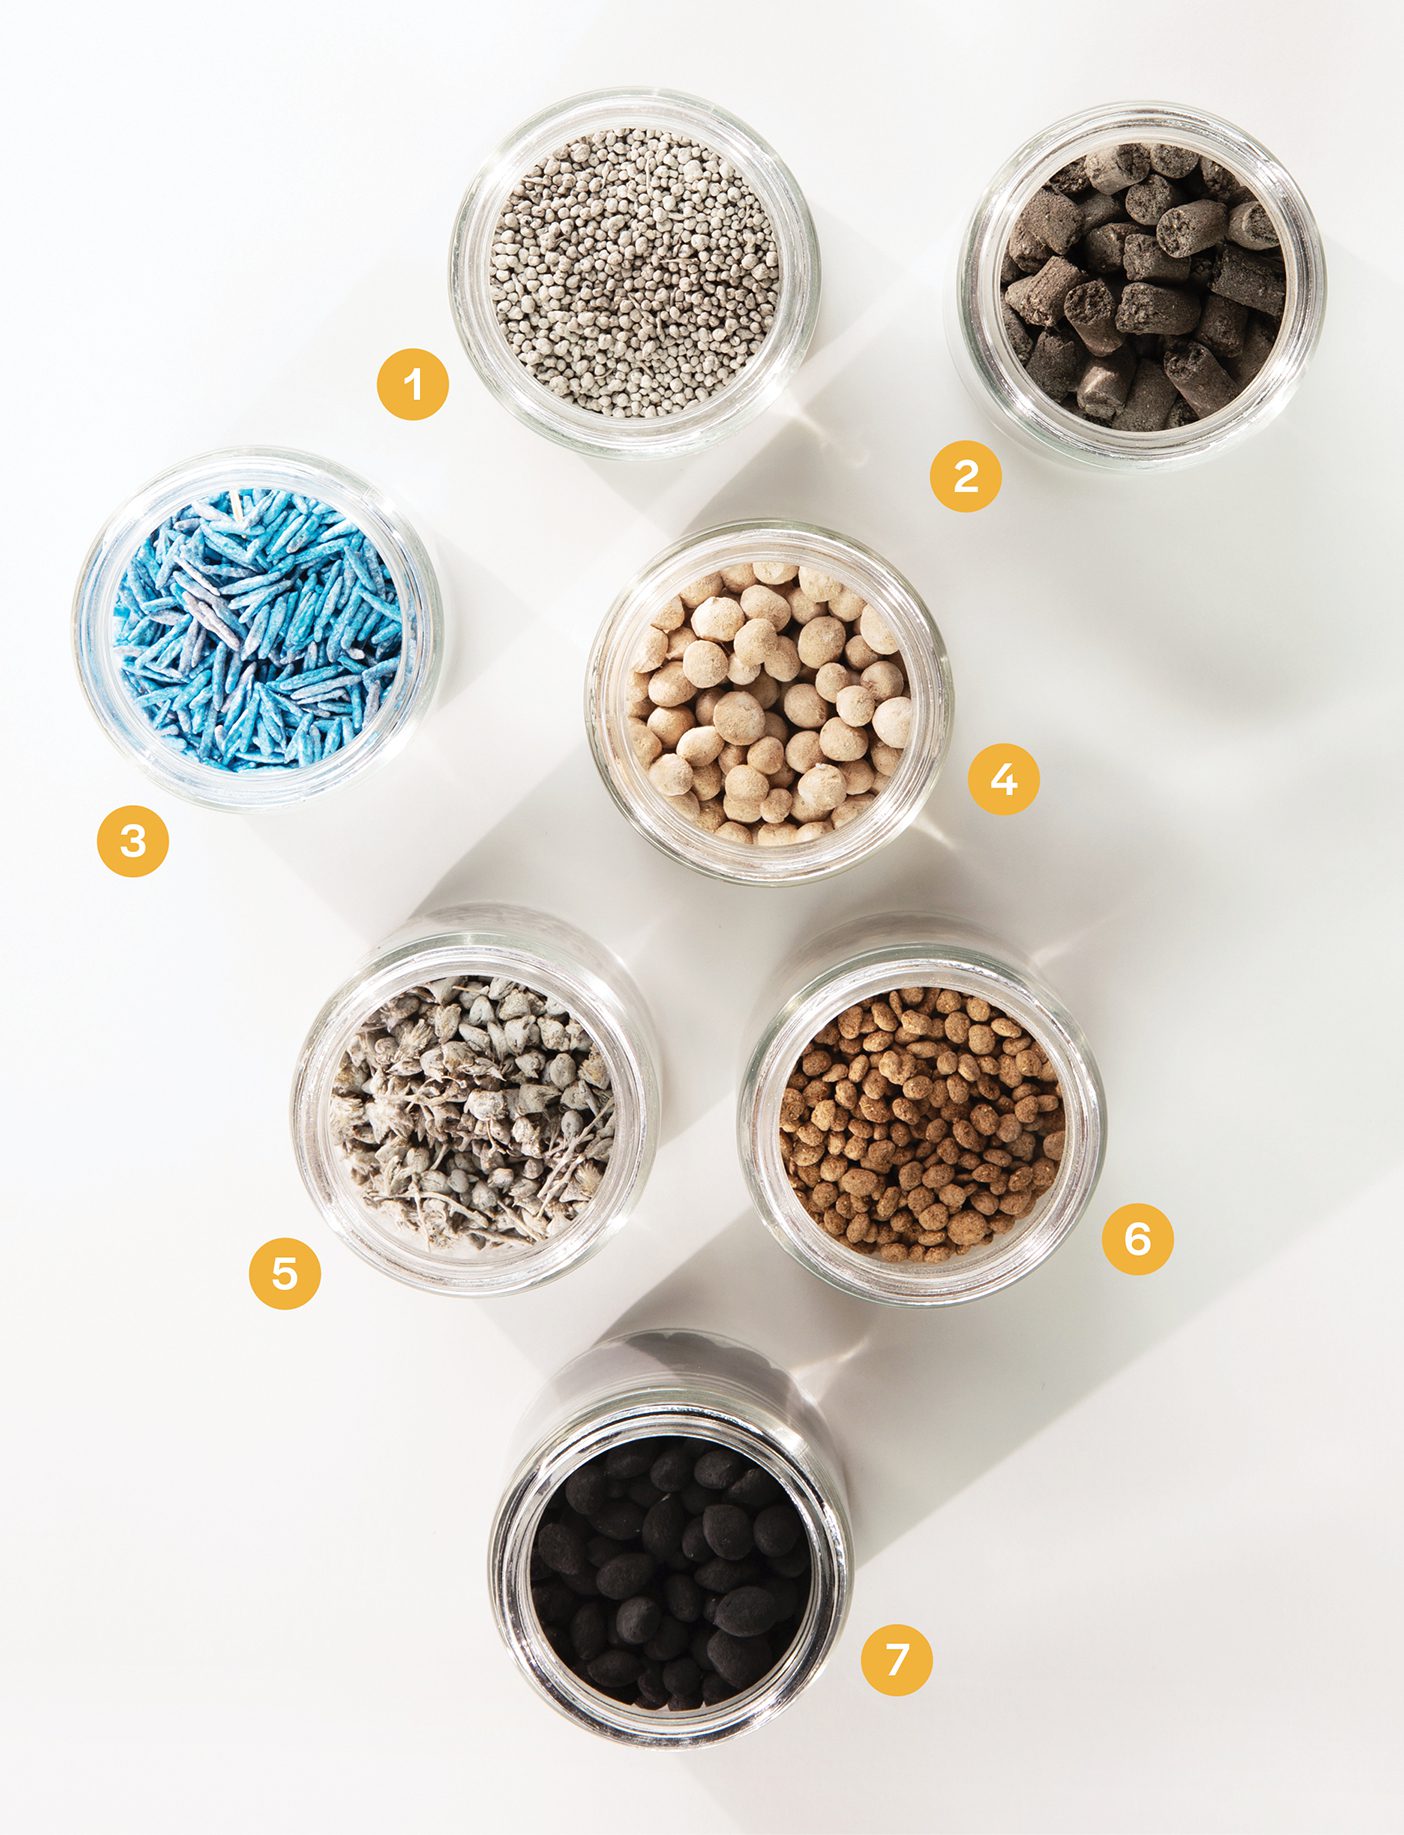 Image of jars with the six kinds of seeds in them and numbers to label them.